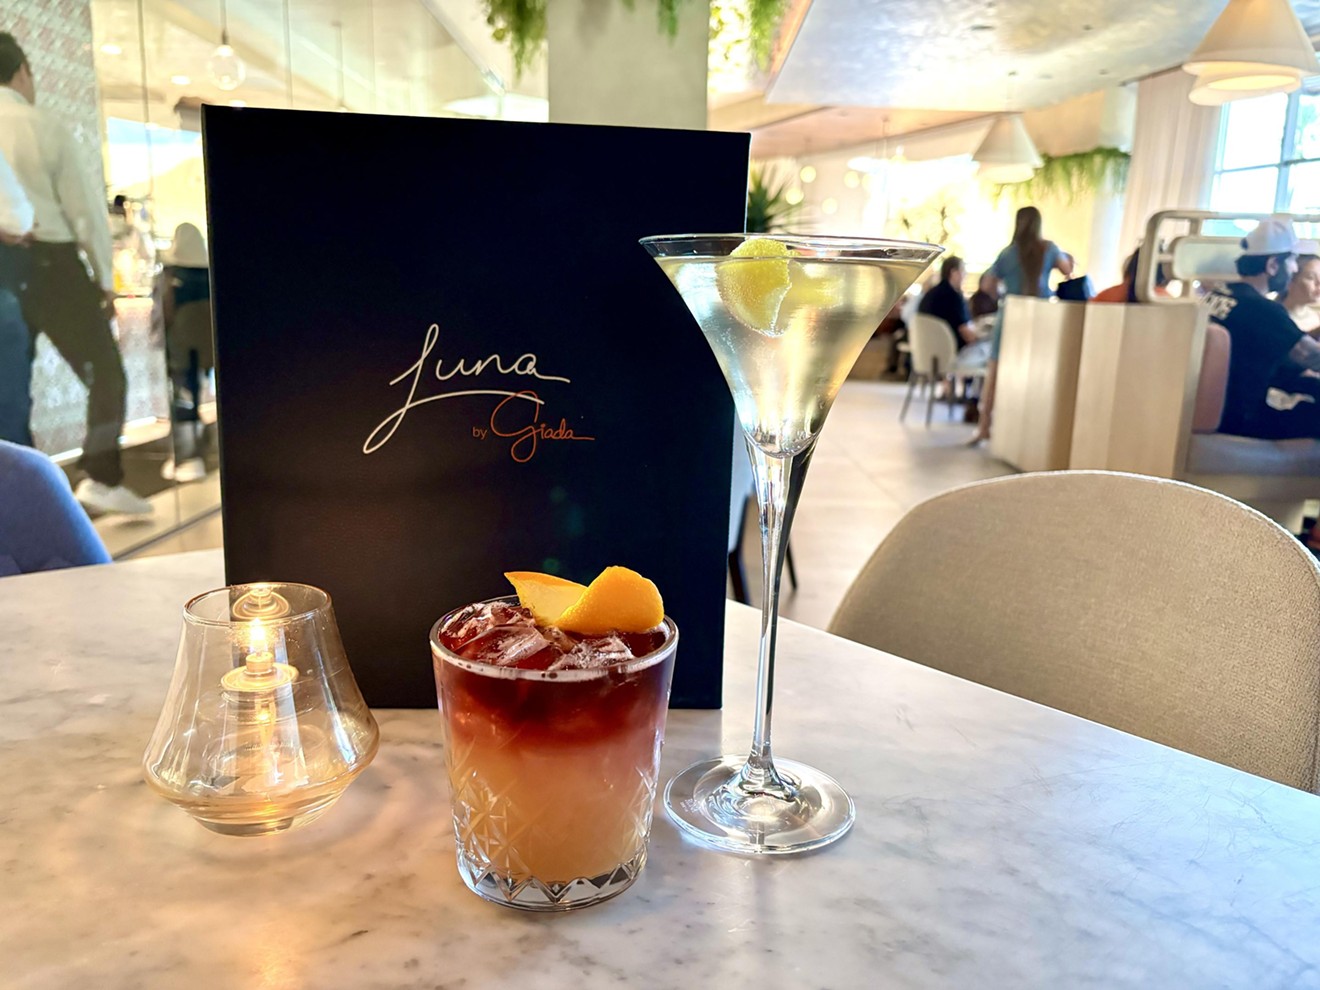 At Luna by Giada, reservations are hard to come by. We tried the restaurant so you don't have to.